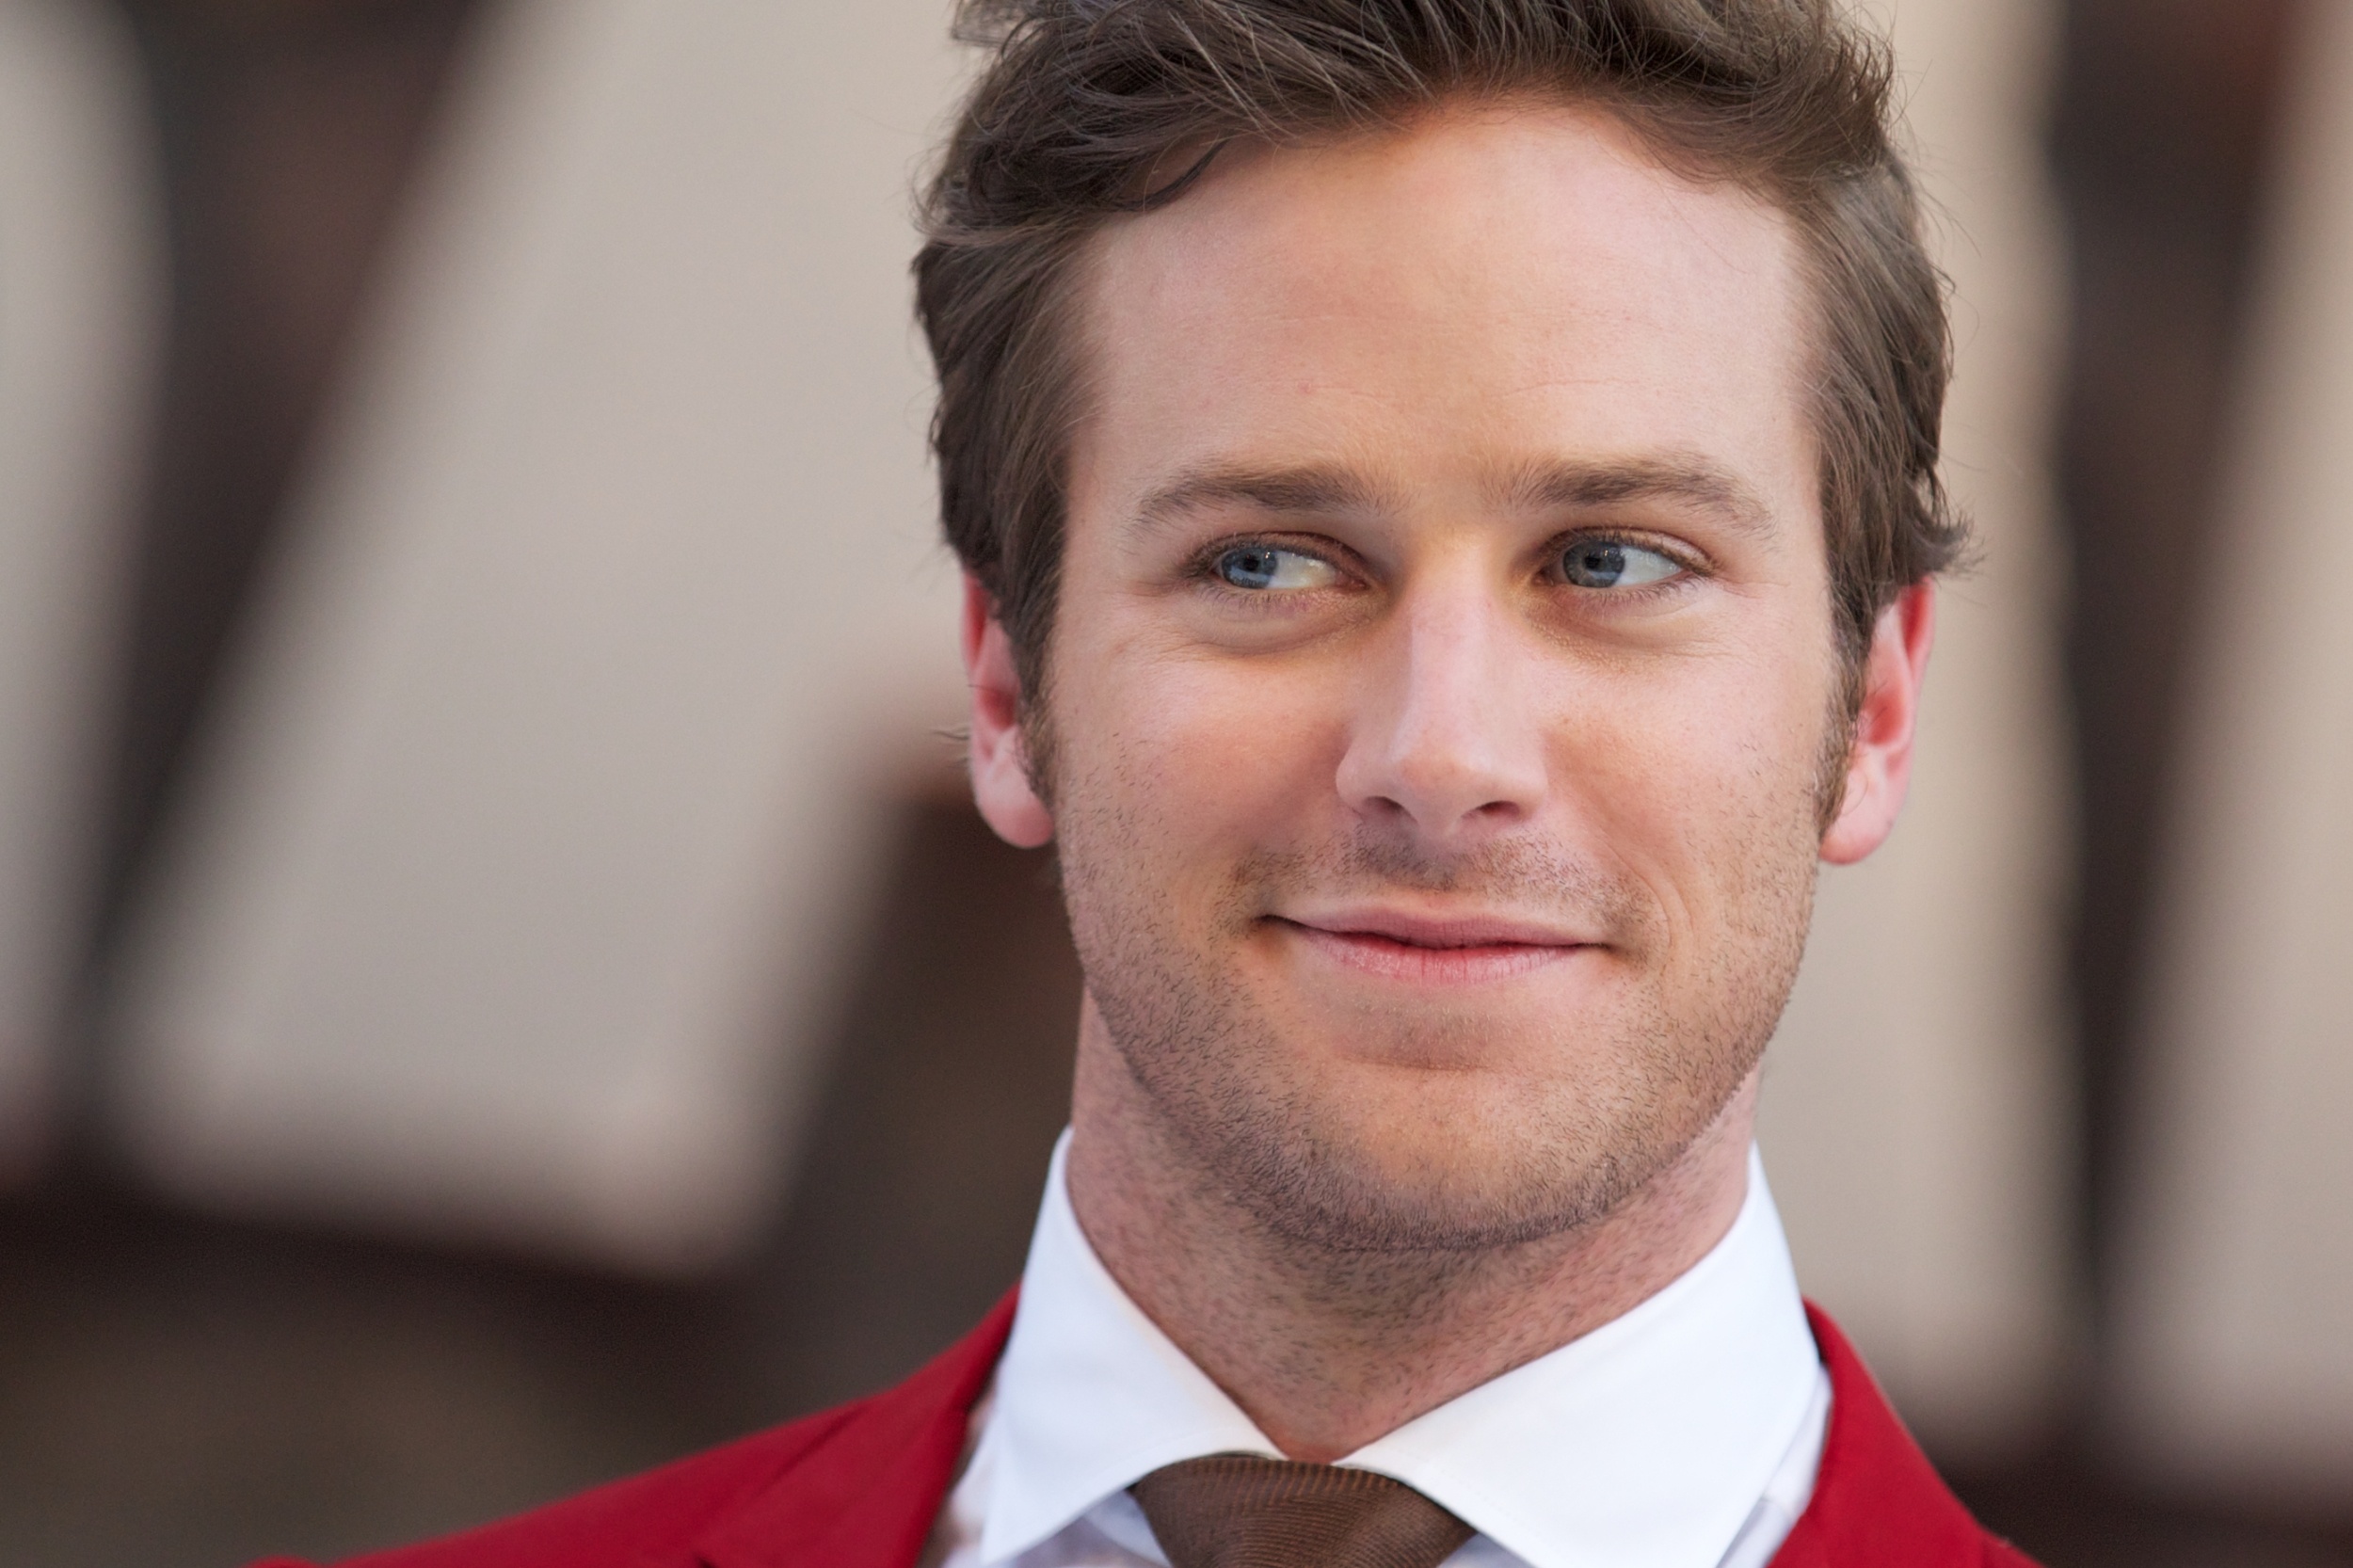 Armie Hammer movies, HD wallpapers, Actor background, High-resolution images, 2500x1670 HD Desktop